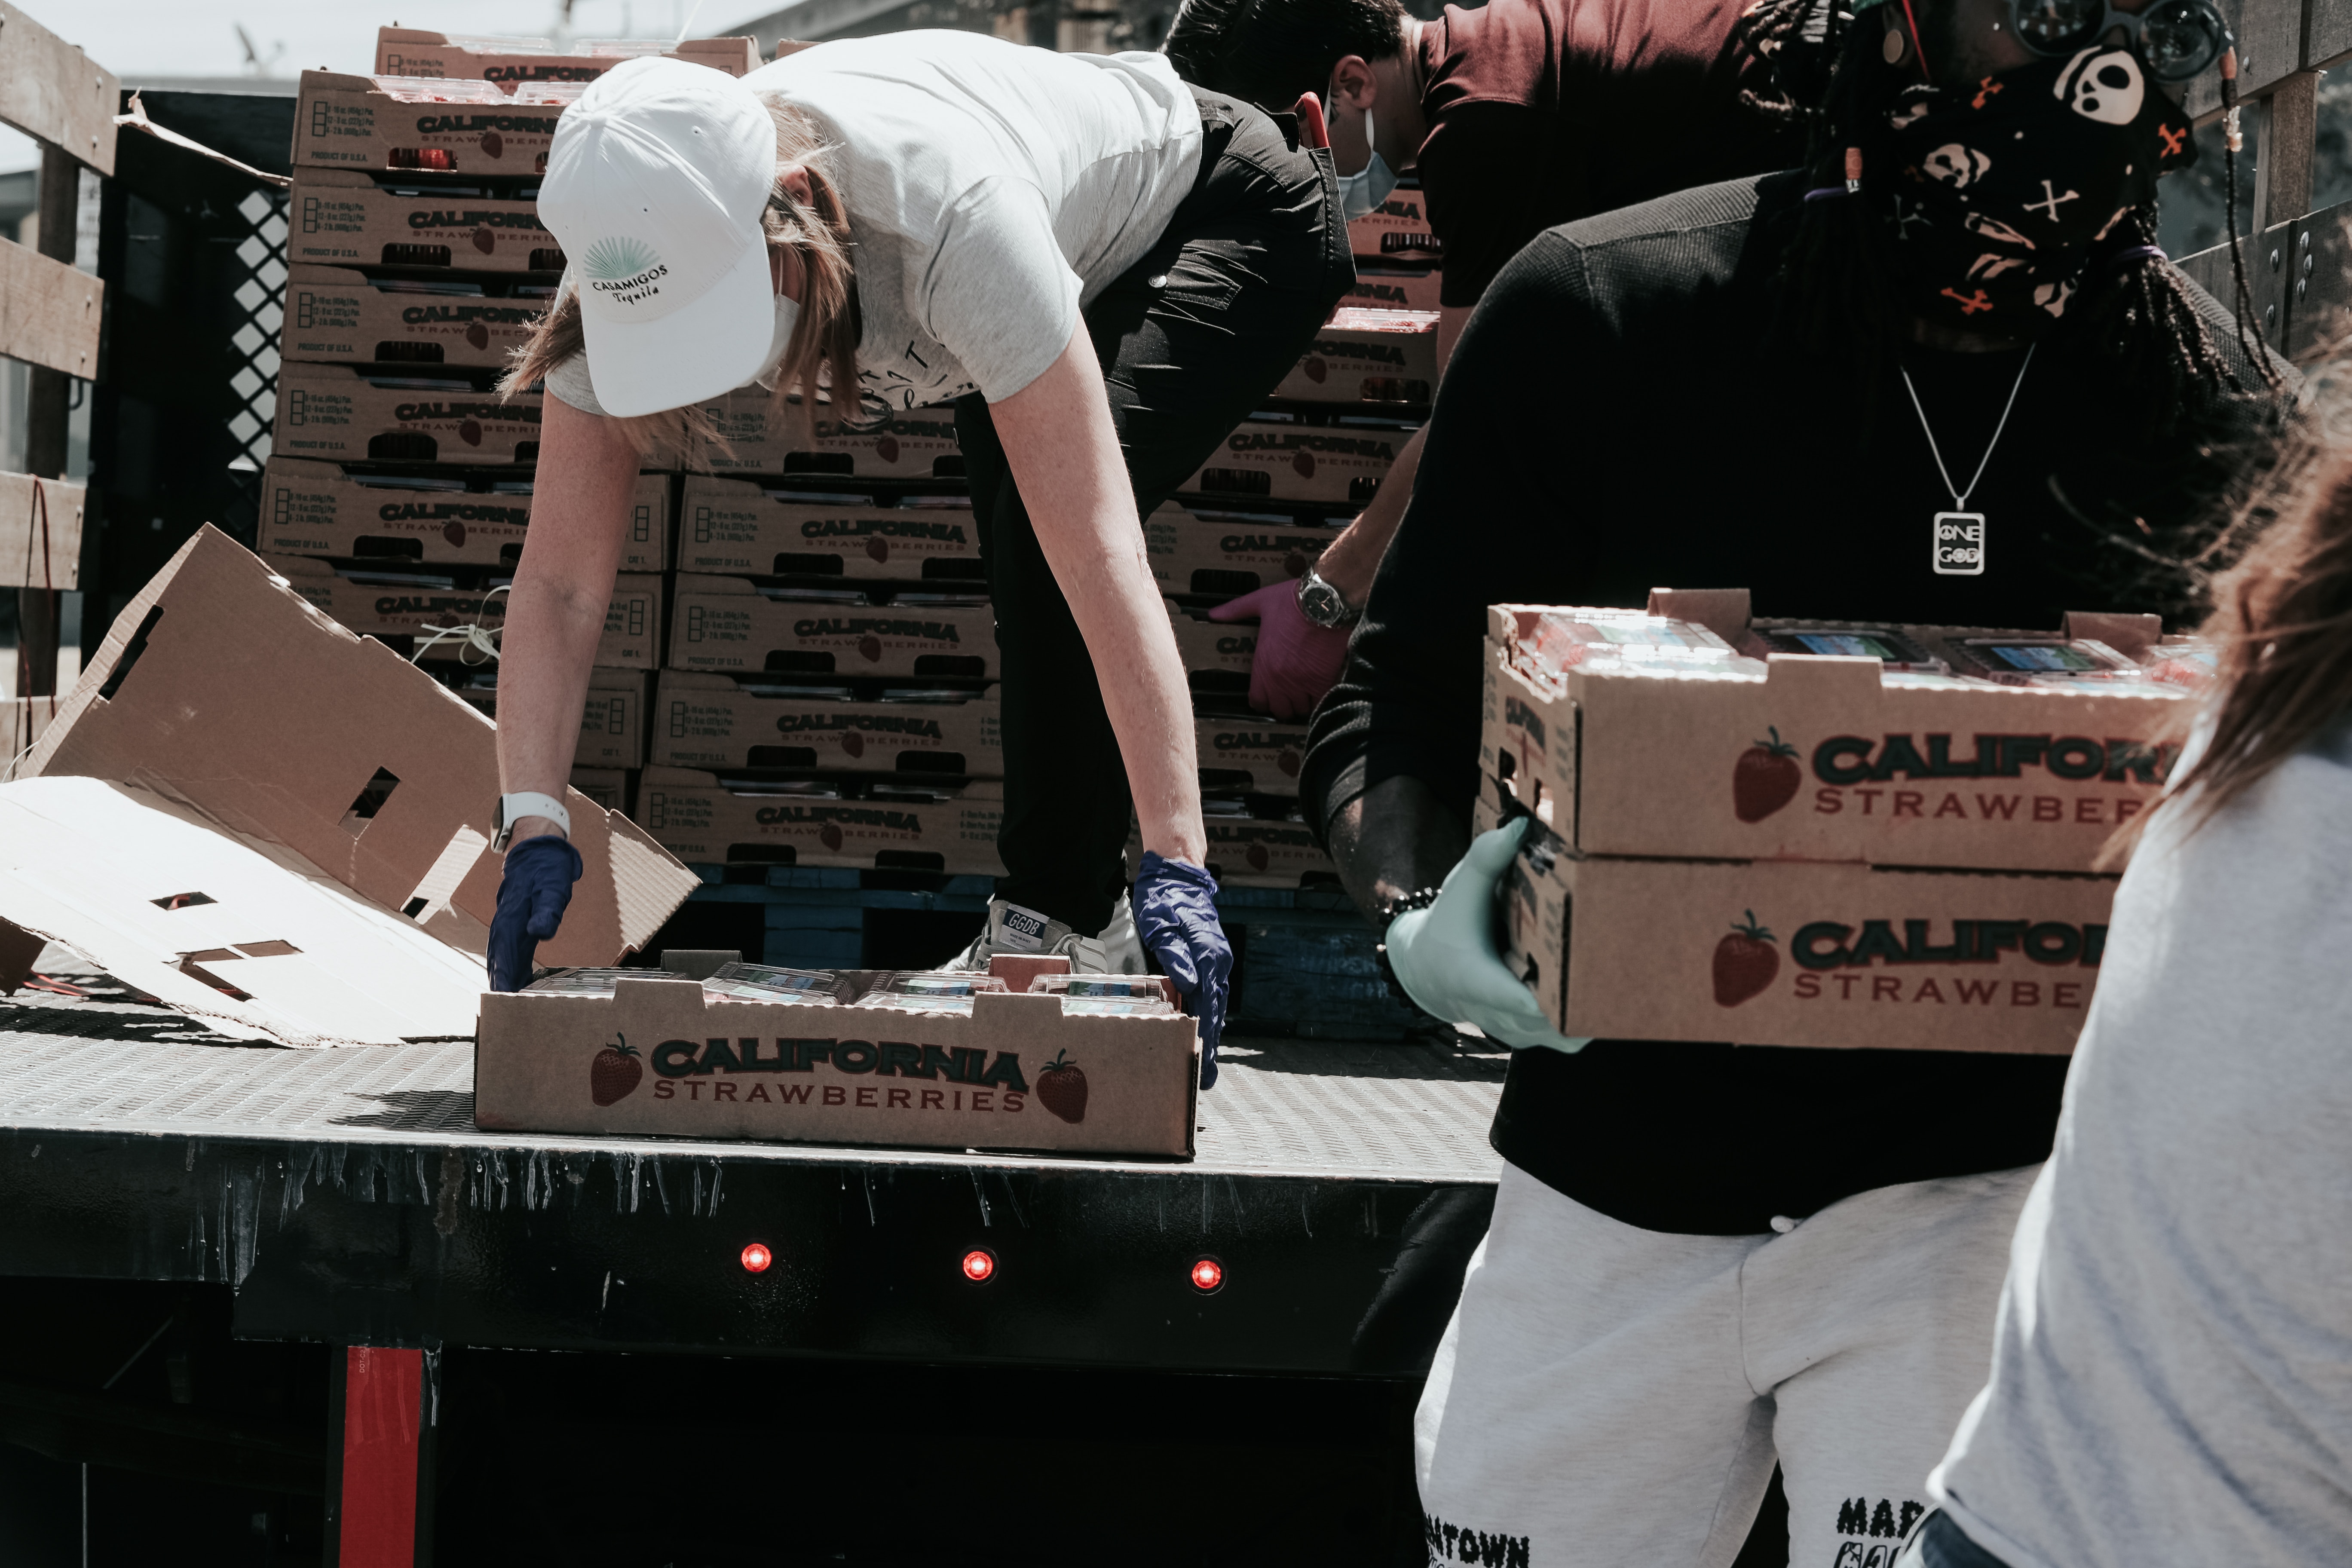 unloading a truck of food donations